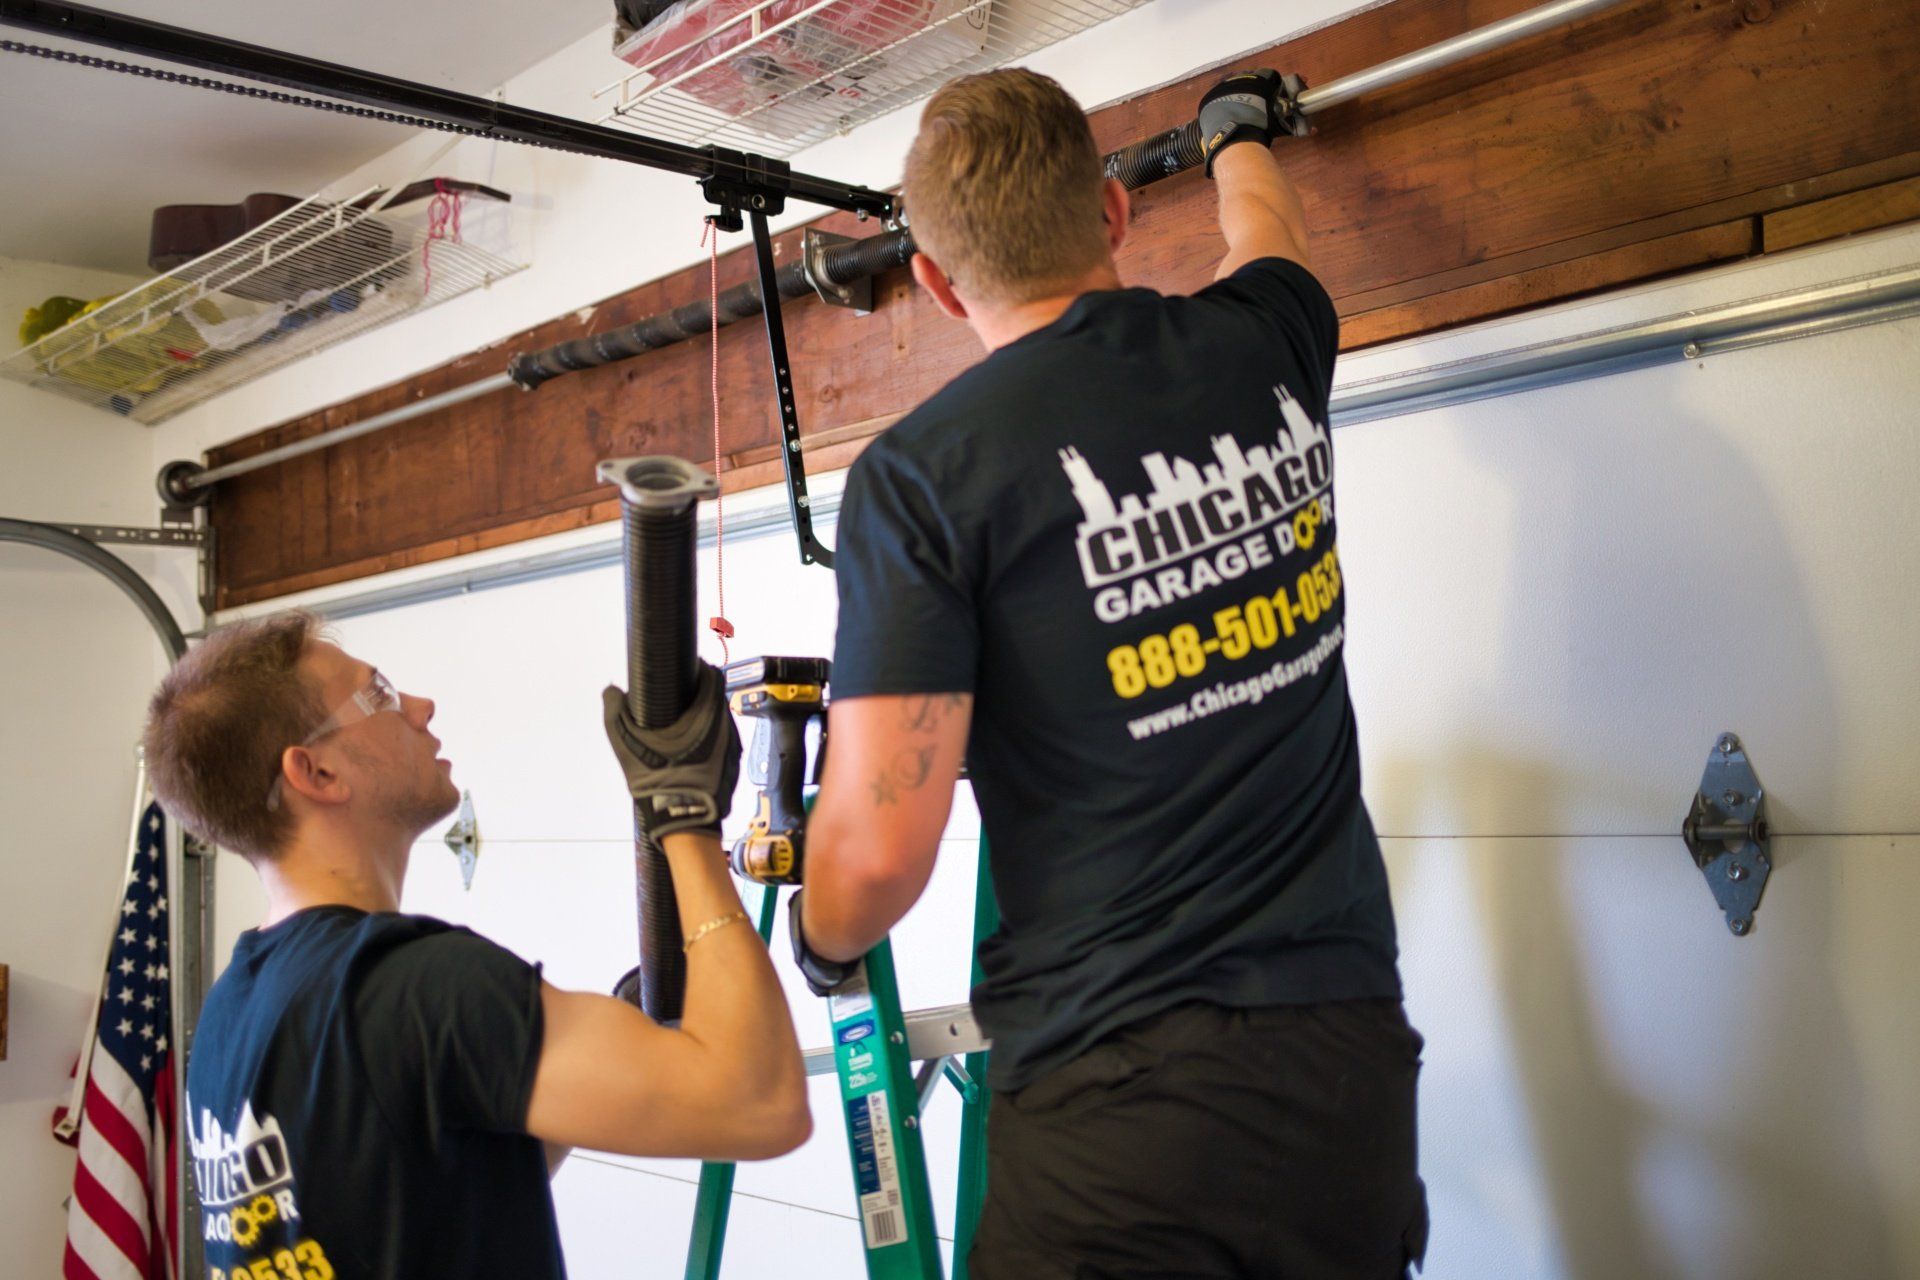 Excellent garage door repair service in Itasca, IL and all the surrounding areas